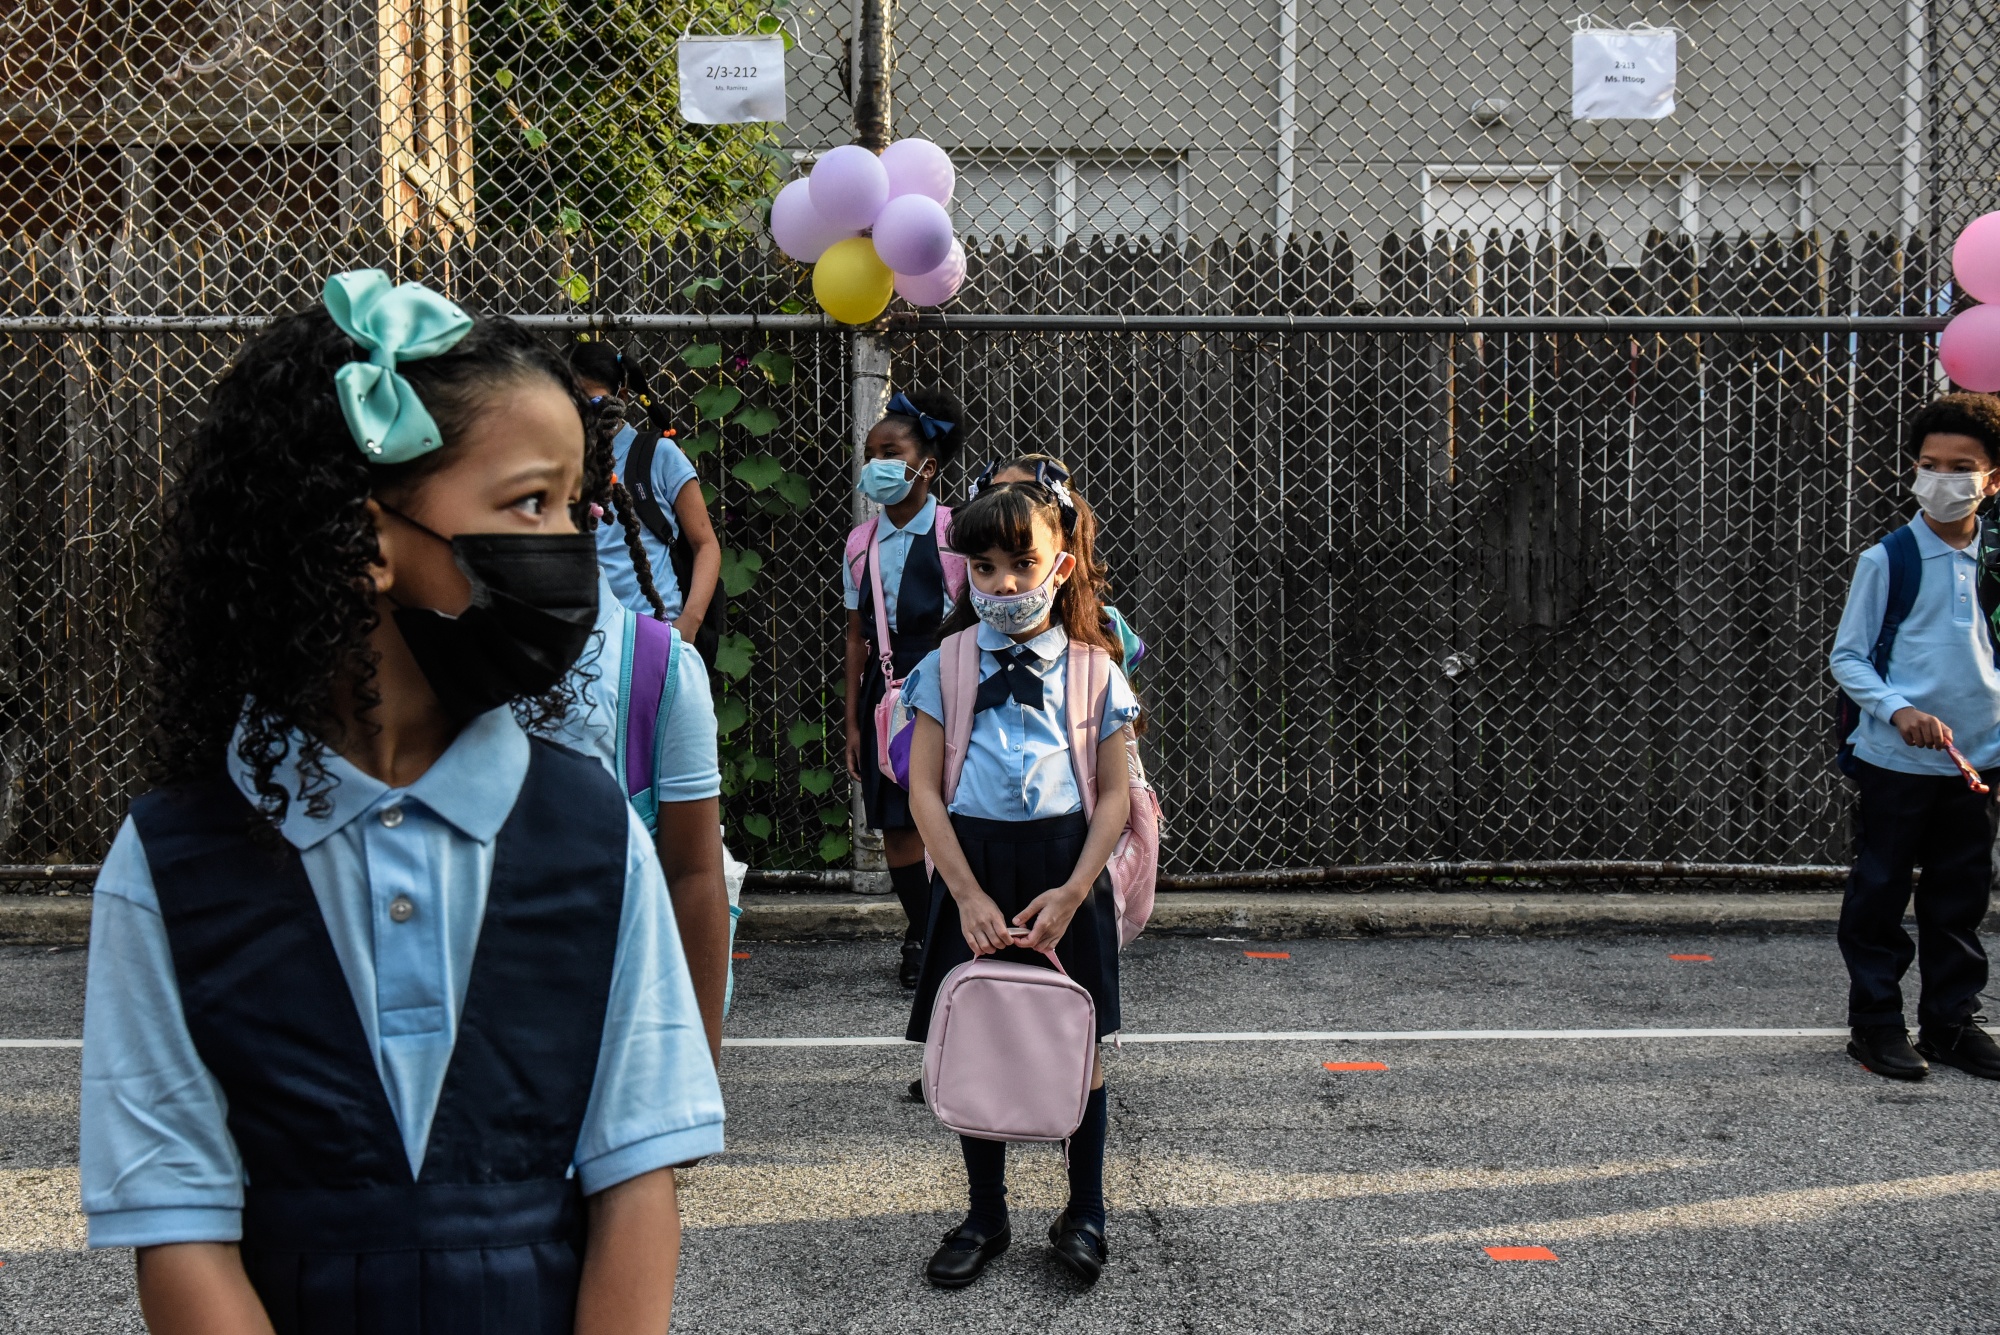 Students wait in line to enter a public school in the Bronx borough in New York.